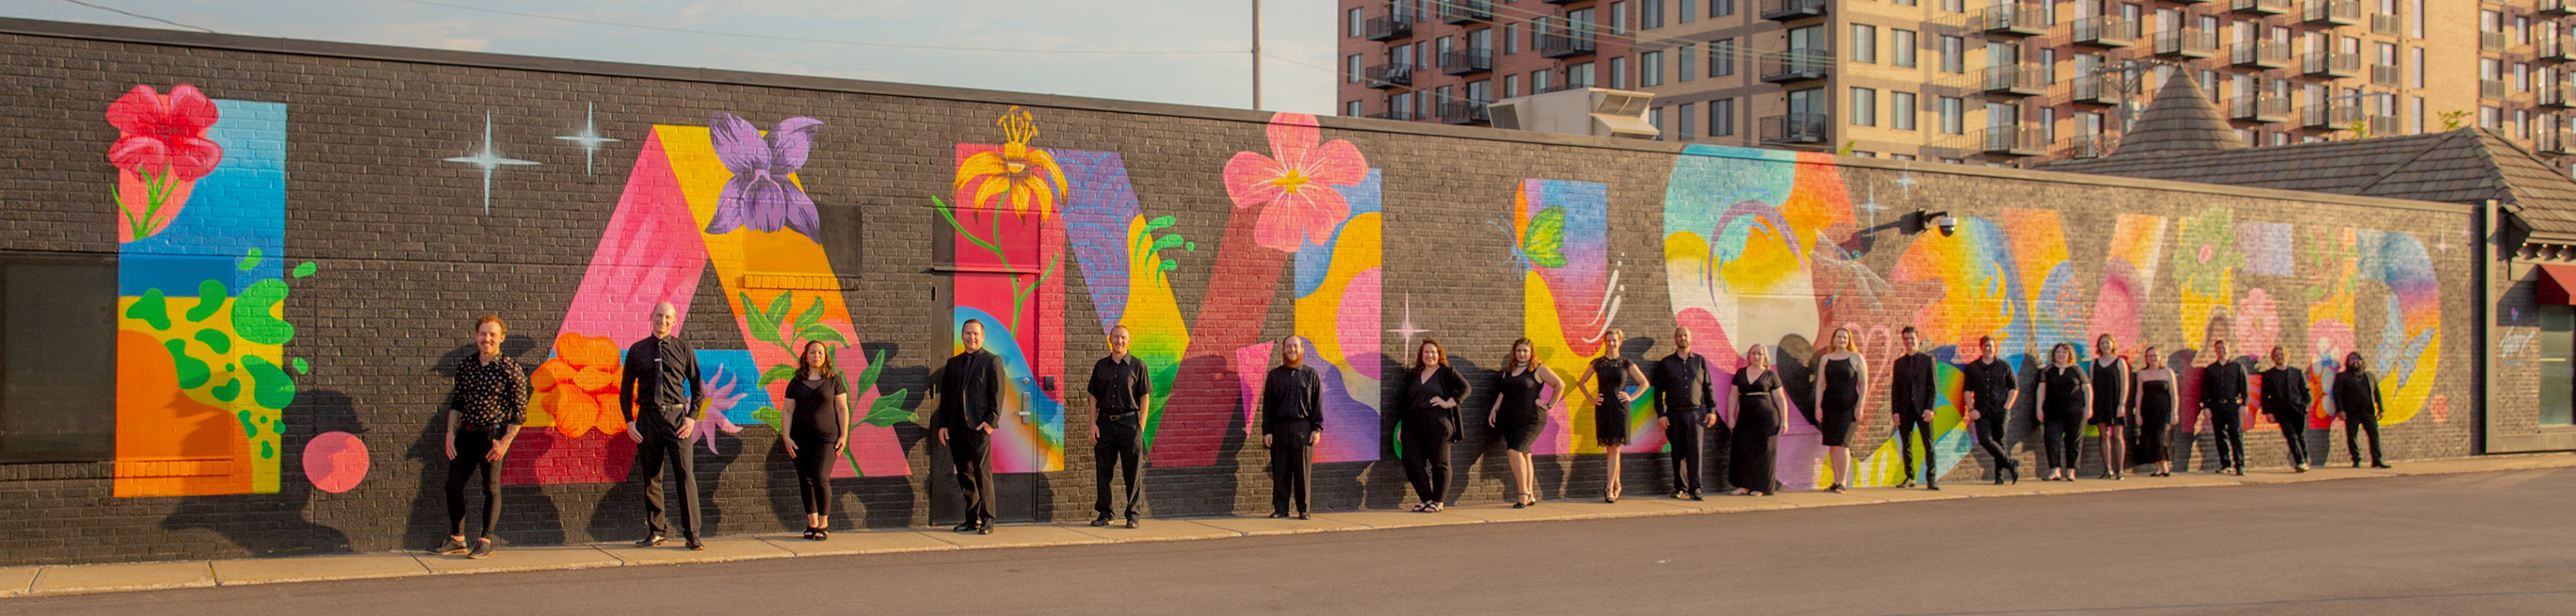 The members of KC VITAs chamber choir standing in front of a colorful mural that reads 'I' am loved'.